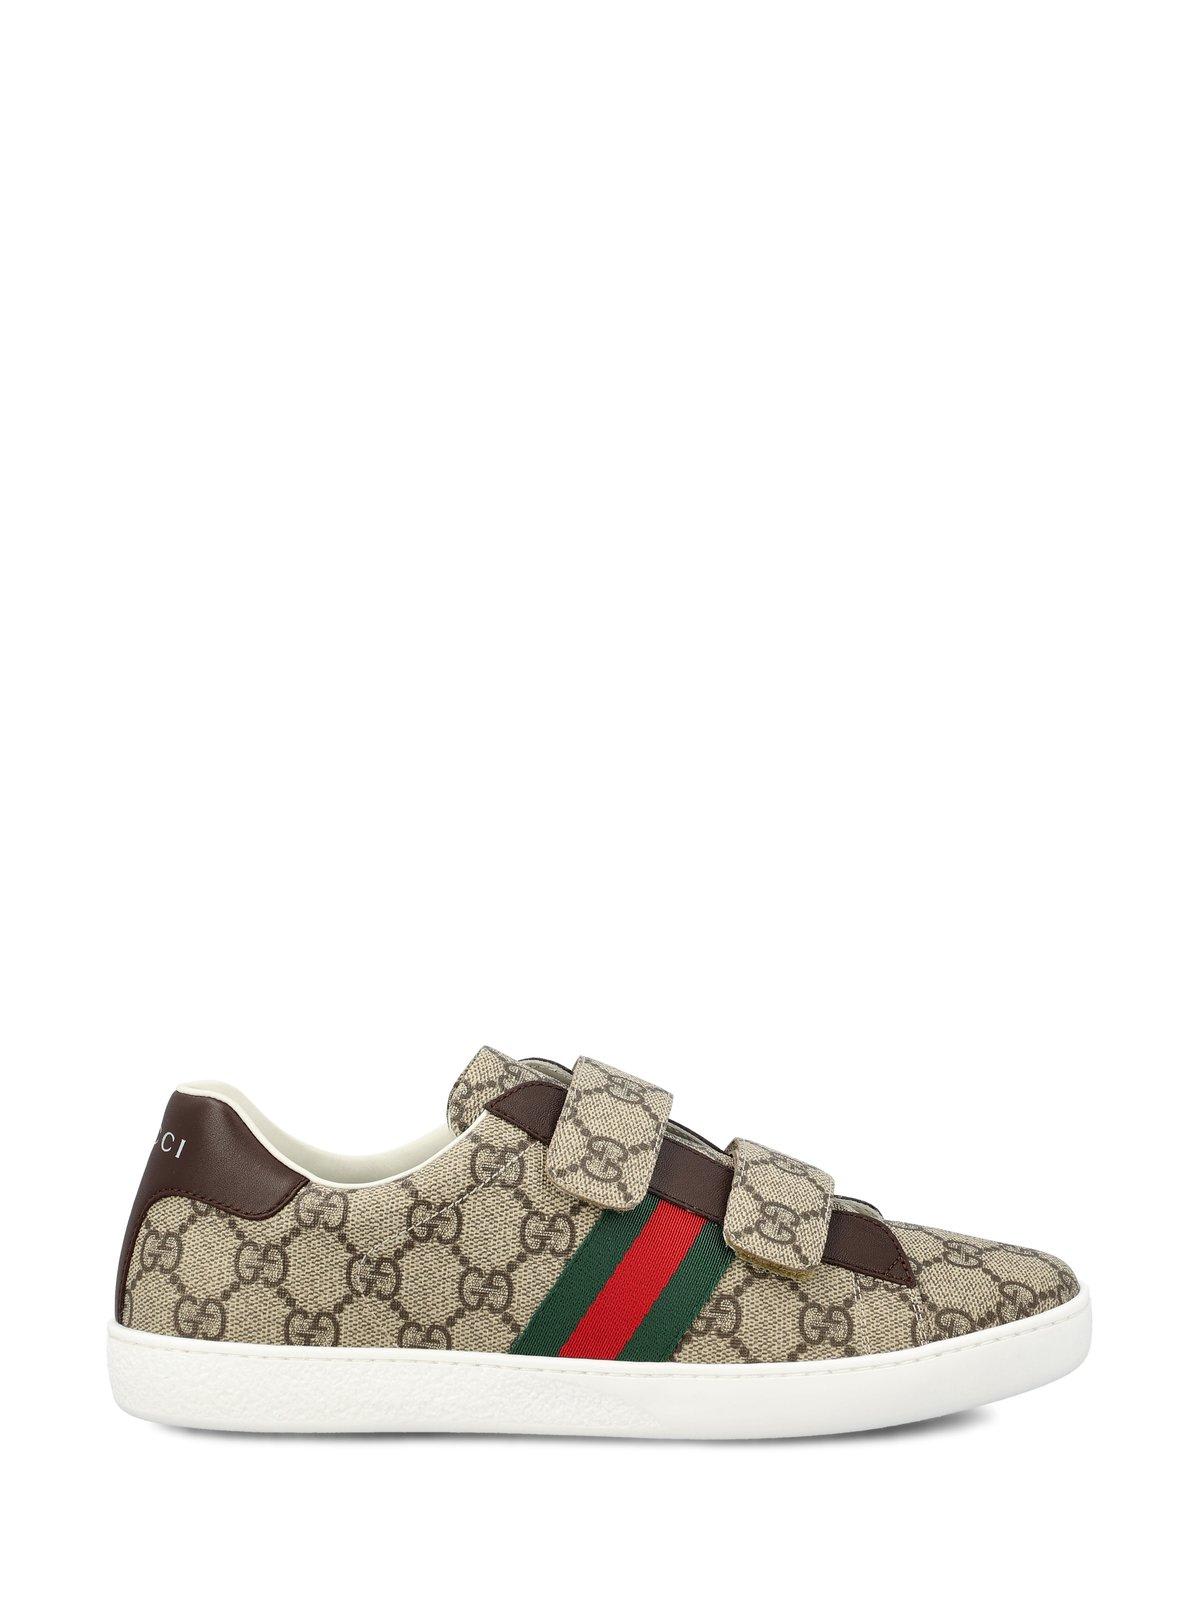 Gucci Ace Logo Printed Sneakers